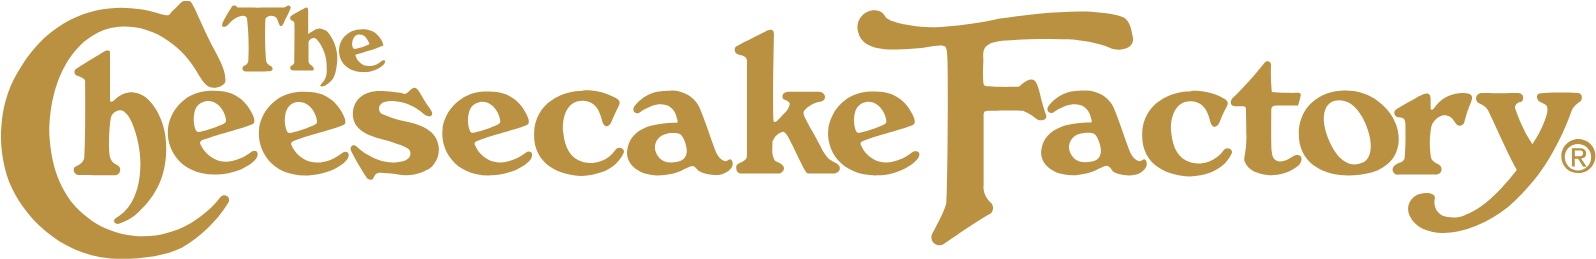 The Cheesecake Factory
 logo large (transparent PNG)